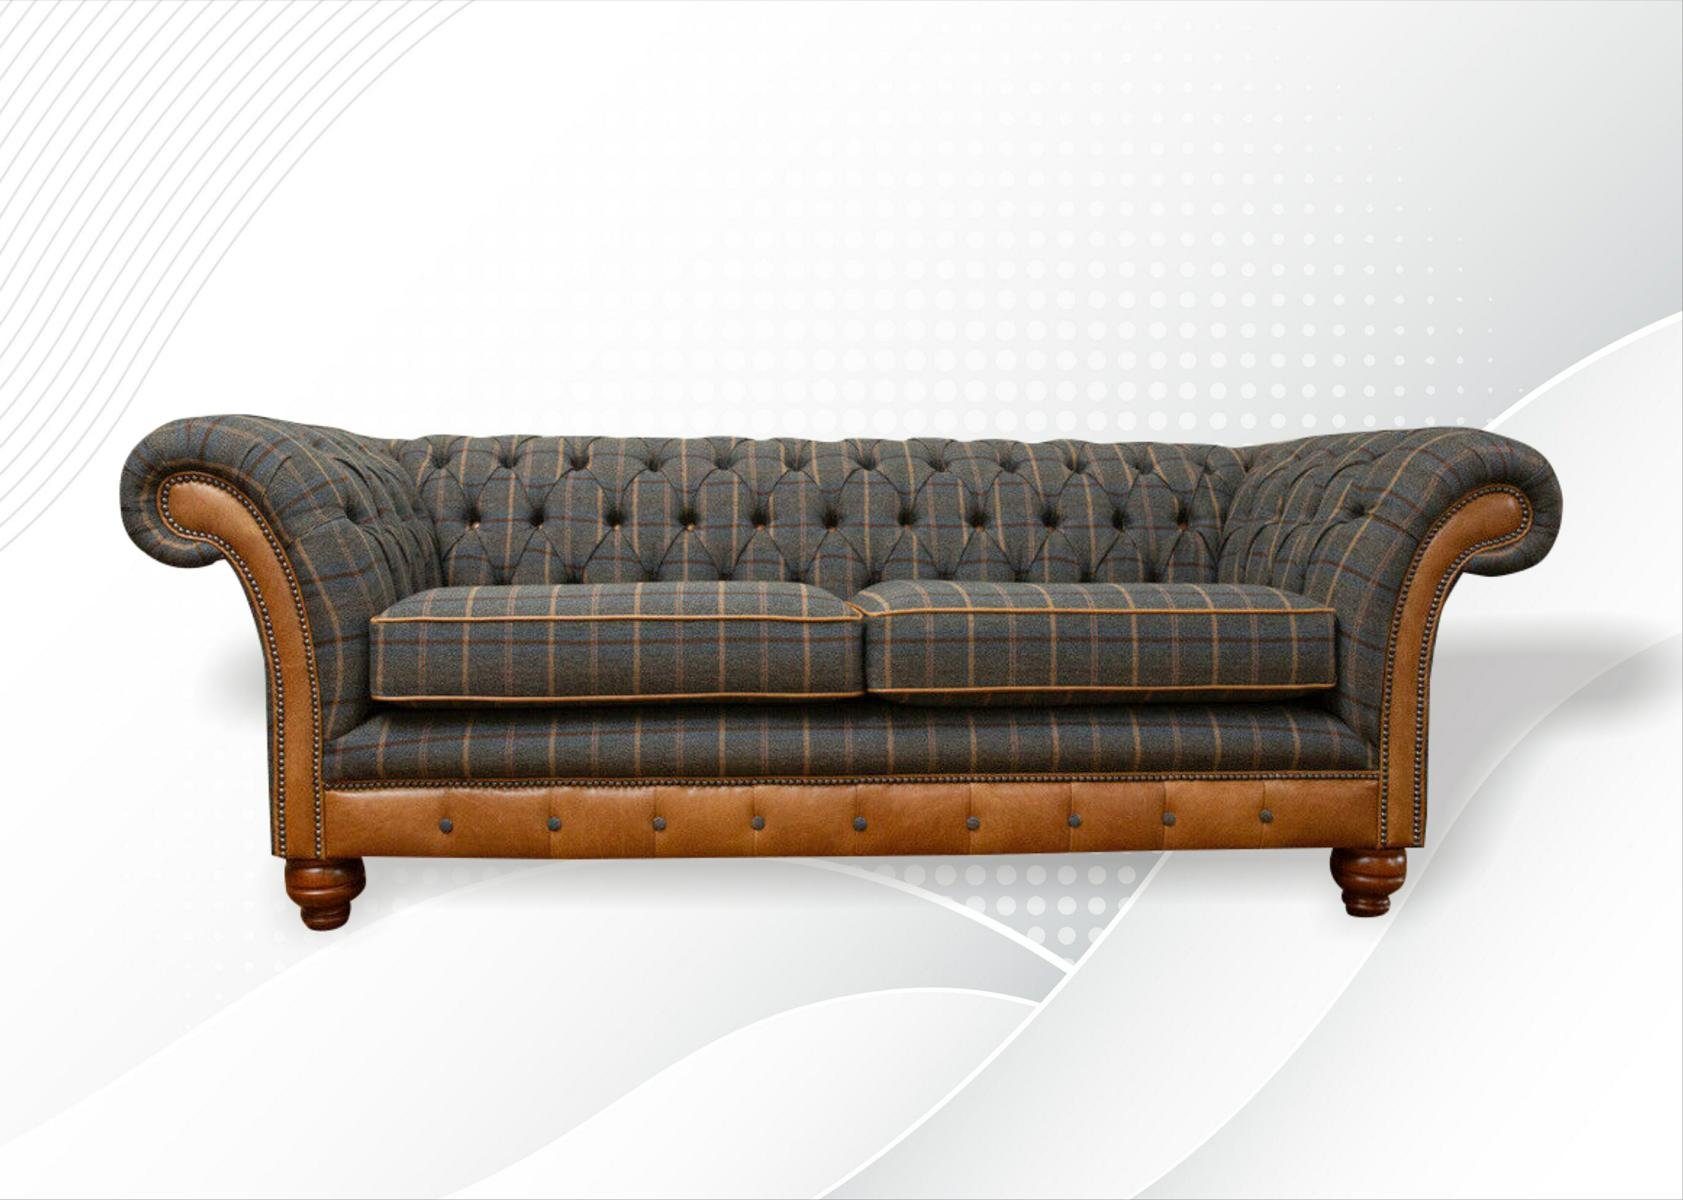 JVmoebel Chesterfield-Sofa, Chesterfield 3 Sitzer Design Sofa Couch 225 cm | Chesterfield-Sofas